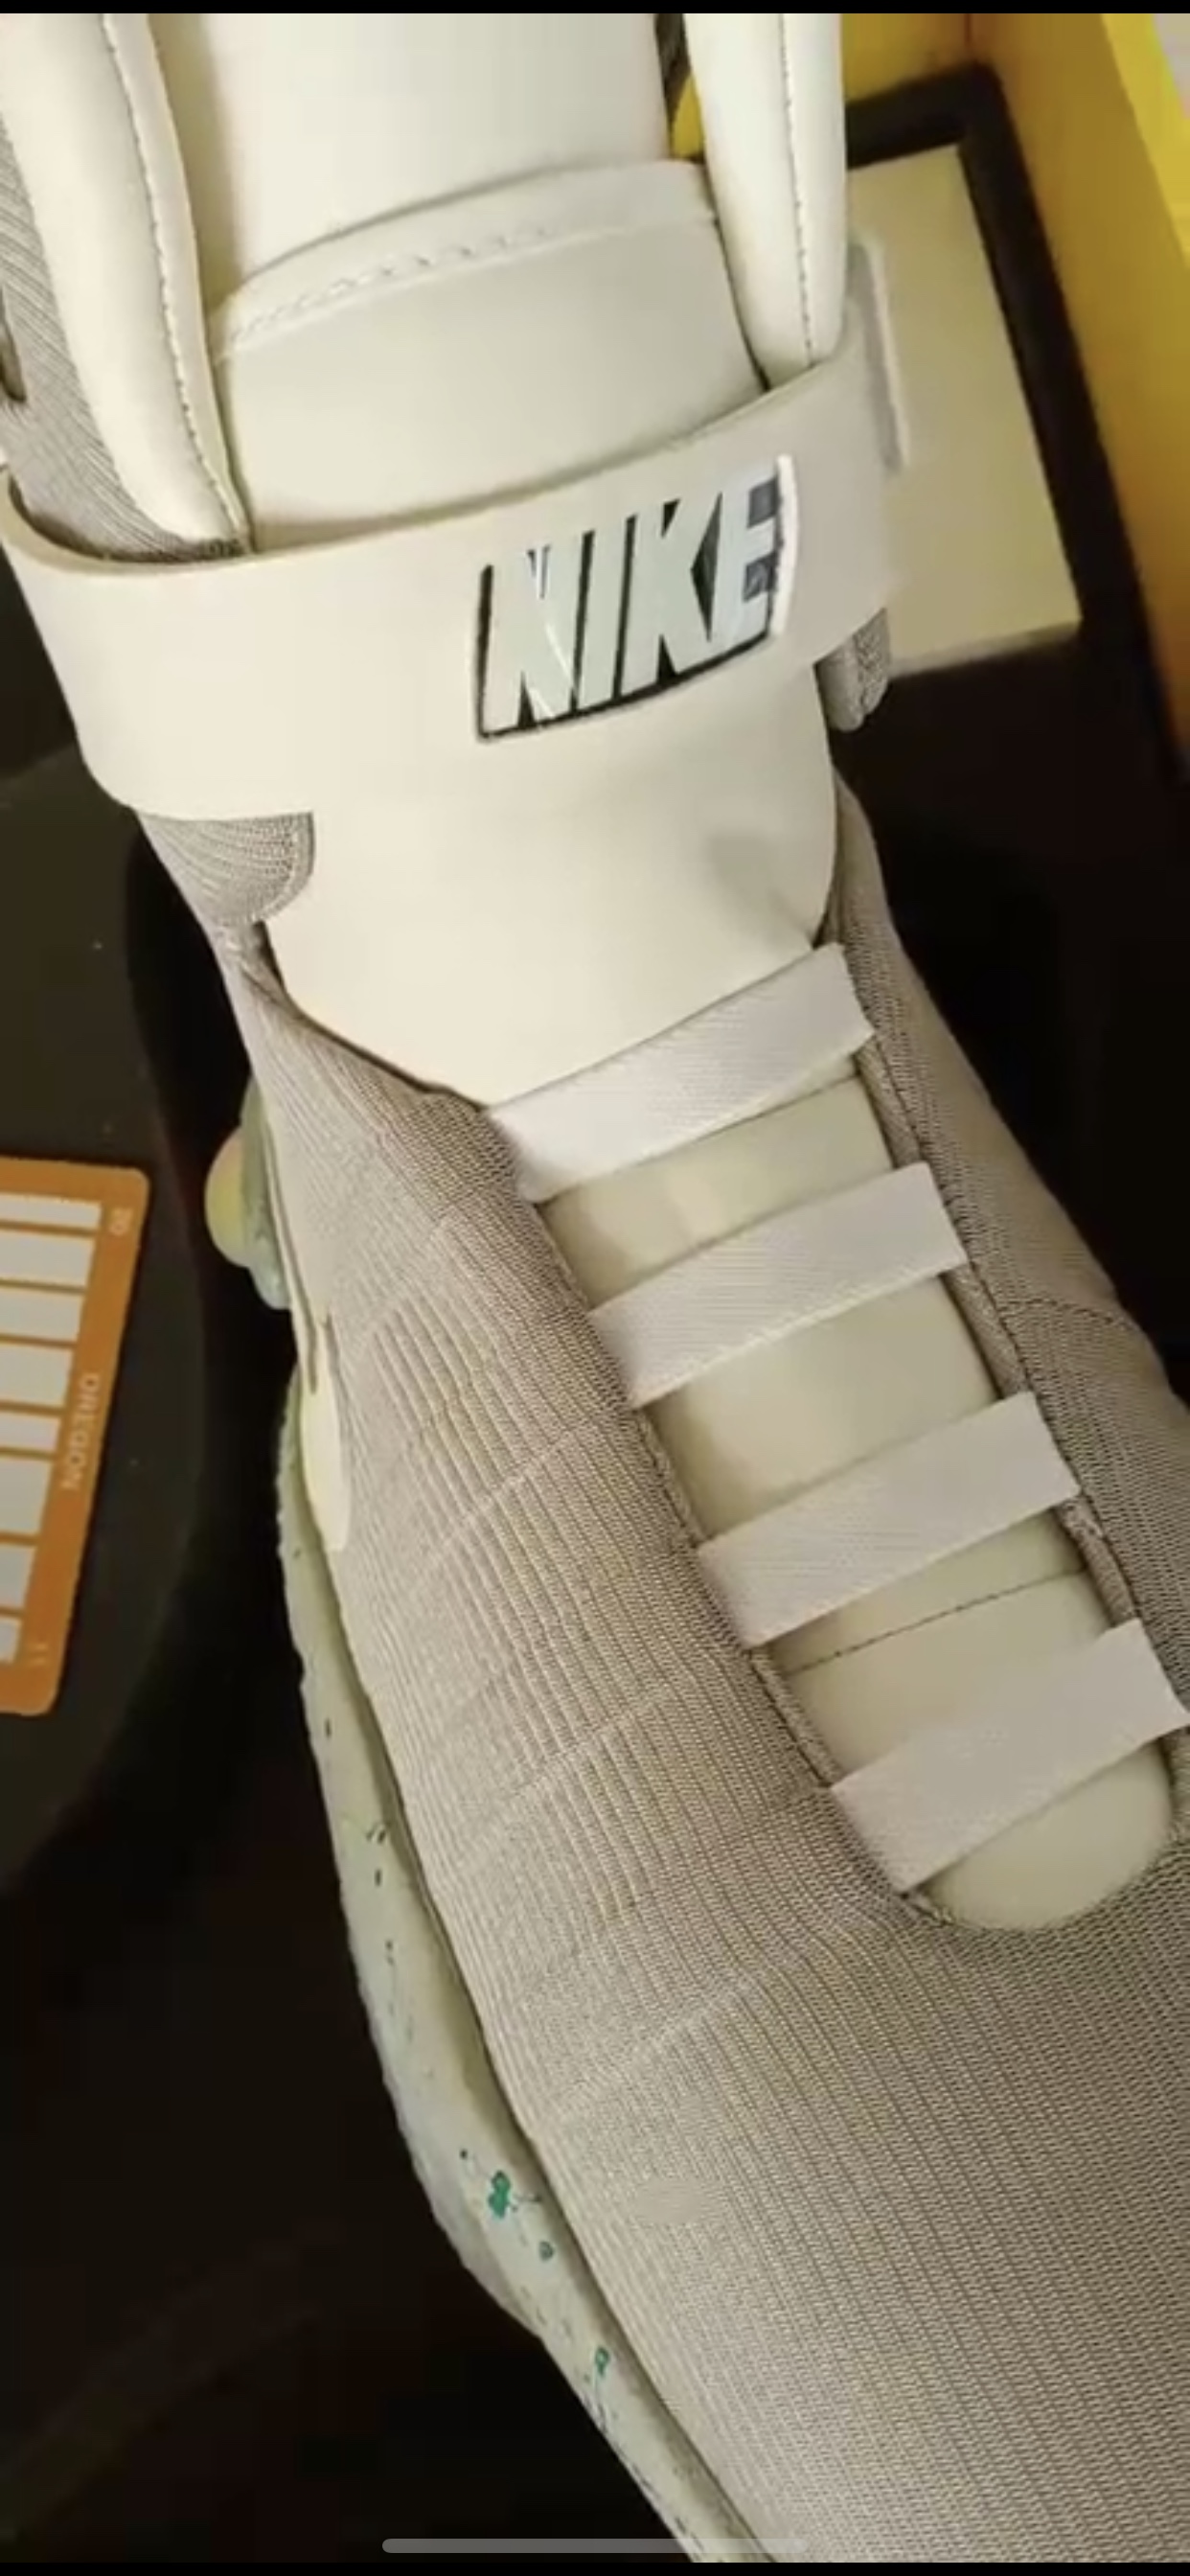 Official V3 Nike MAG Replica Thread - V3 Discussion Thread | Page 192 | RPF  Costume and Prop Maker Community